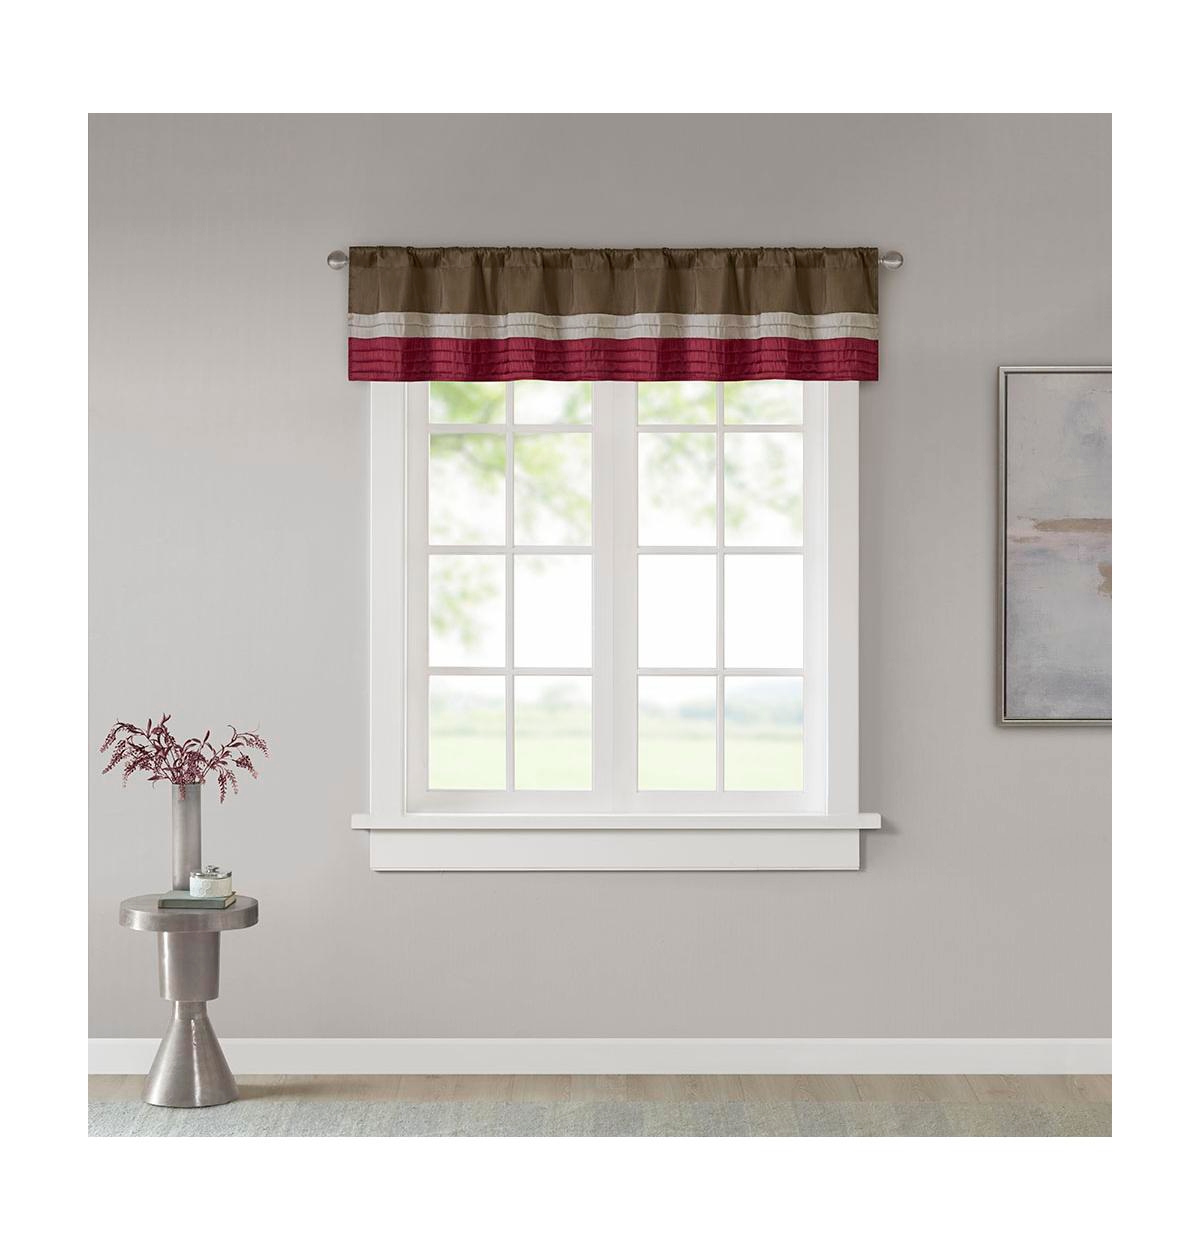 Amherst Polyoni Pin tuck Valance Curtain - Red